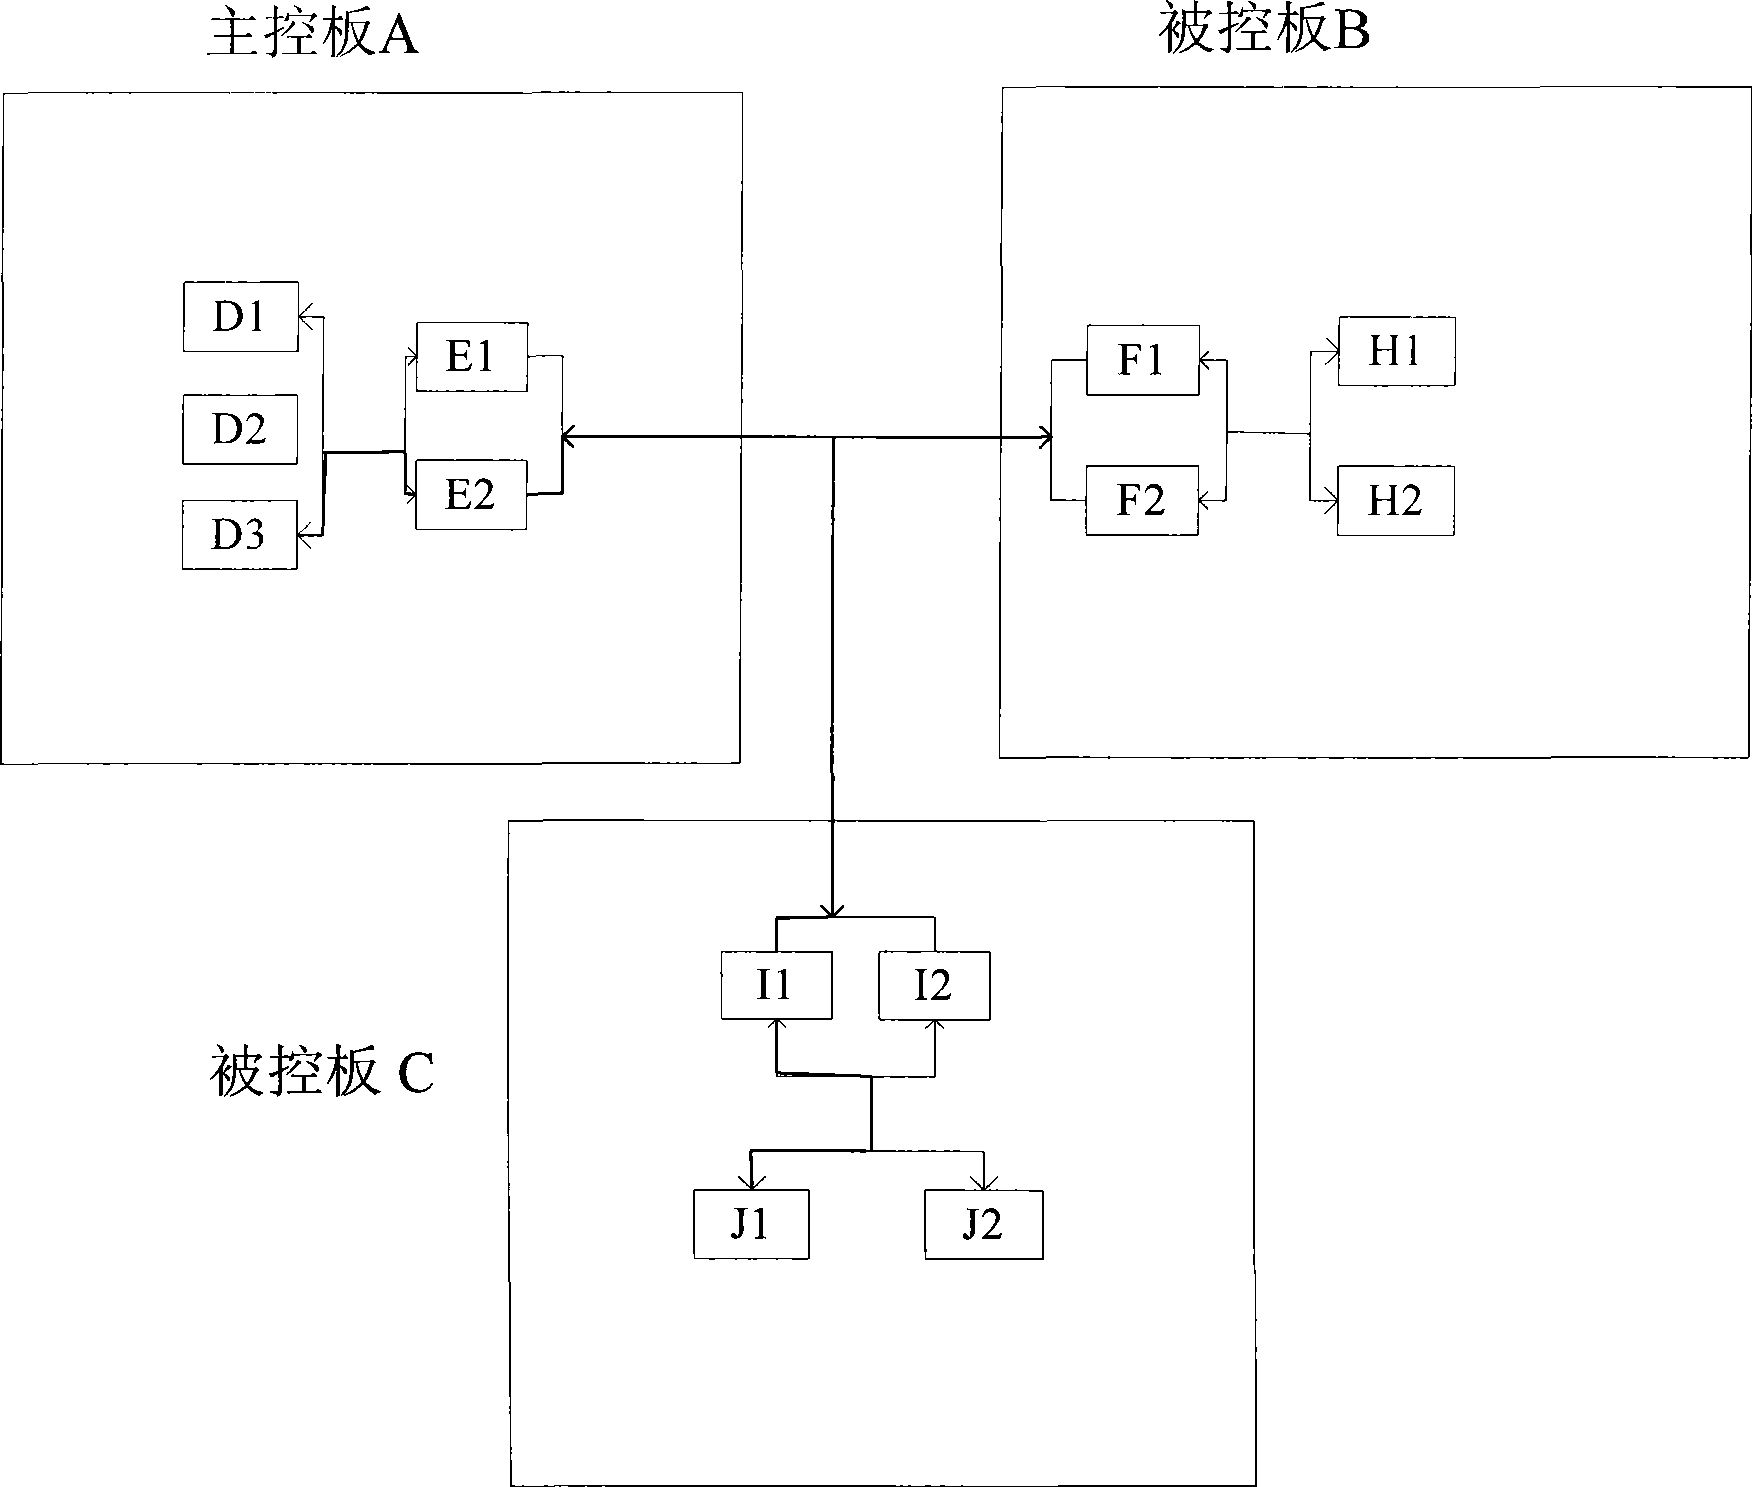 System and method for inter-board communication